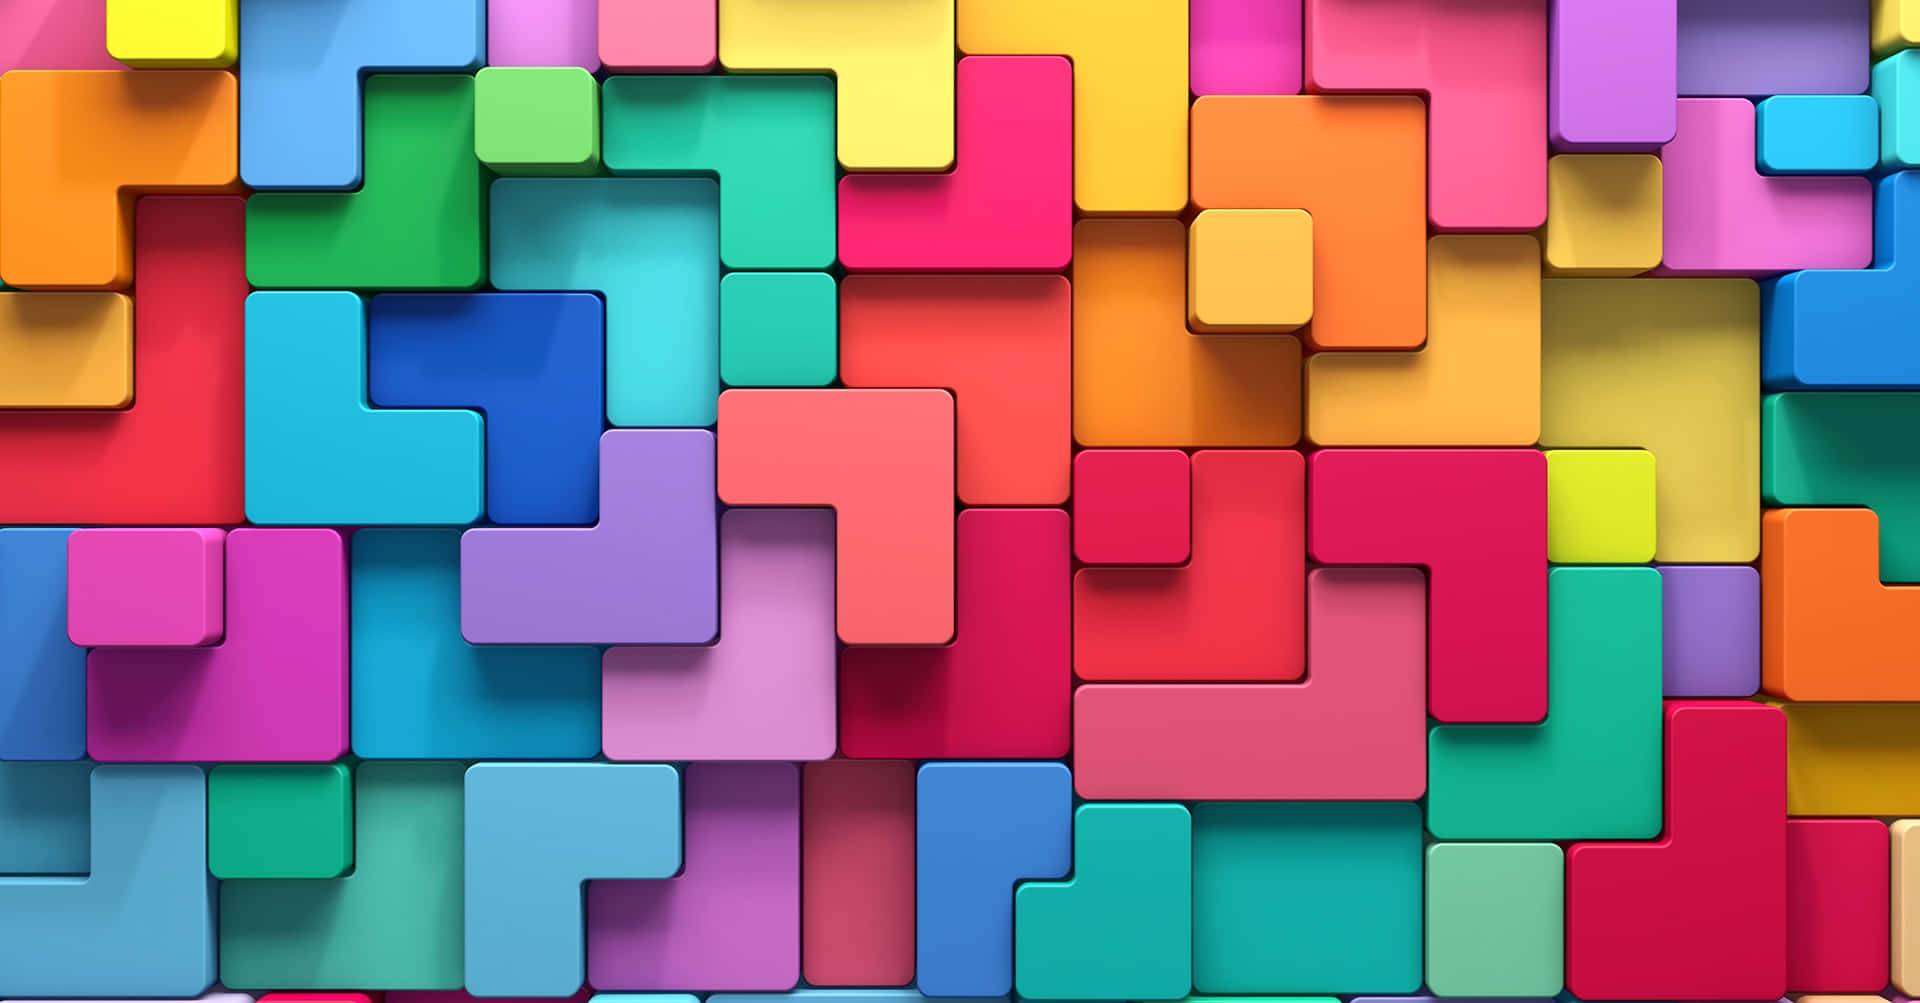 Colorful Blocks In A Colorful Background